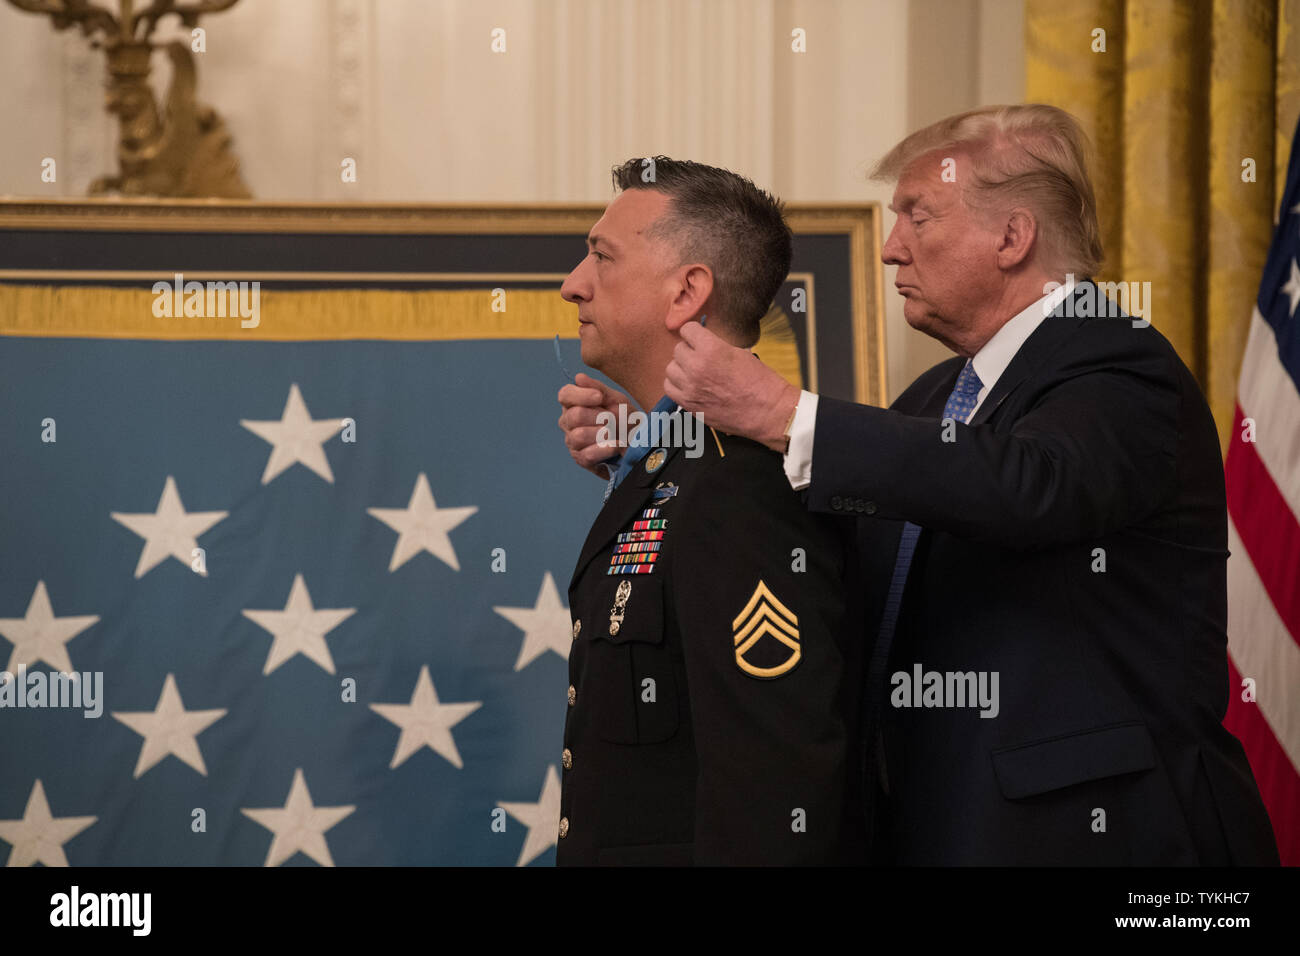 President Donald J. Trump presents the Medal of Honor to former U.S. Army Staff Sgt David G. Bellavia during a ceremony at the White House in Washington, D.C., June 25, 2019. Bellavia was awarded the Medal of Honor (Date), 2019, for actions while serving as a squad leader with the 1st Infantry Division in support of Operation Phantom Fury in Fallujah, Iraq when a squad from his platoon became trapped by intense enemy fire. (U.S. Army Photo by Sgt. Kevin Roy) Stock Photo